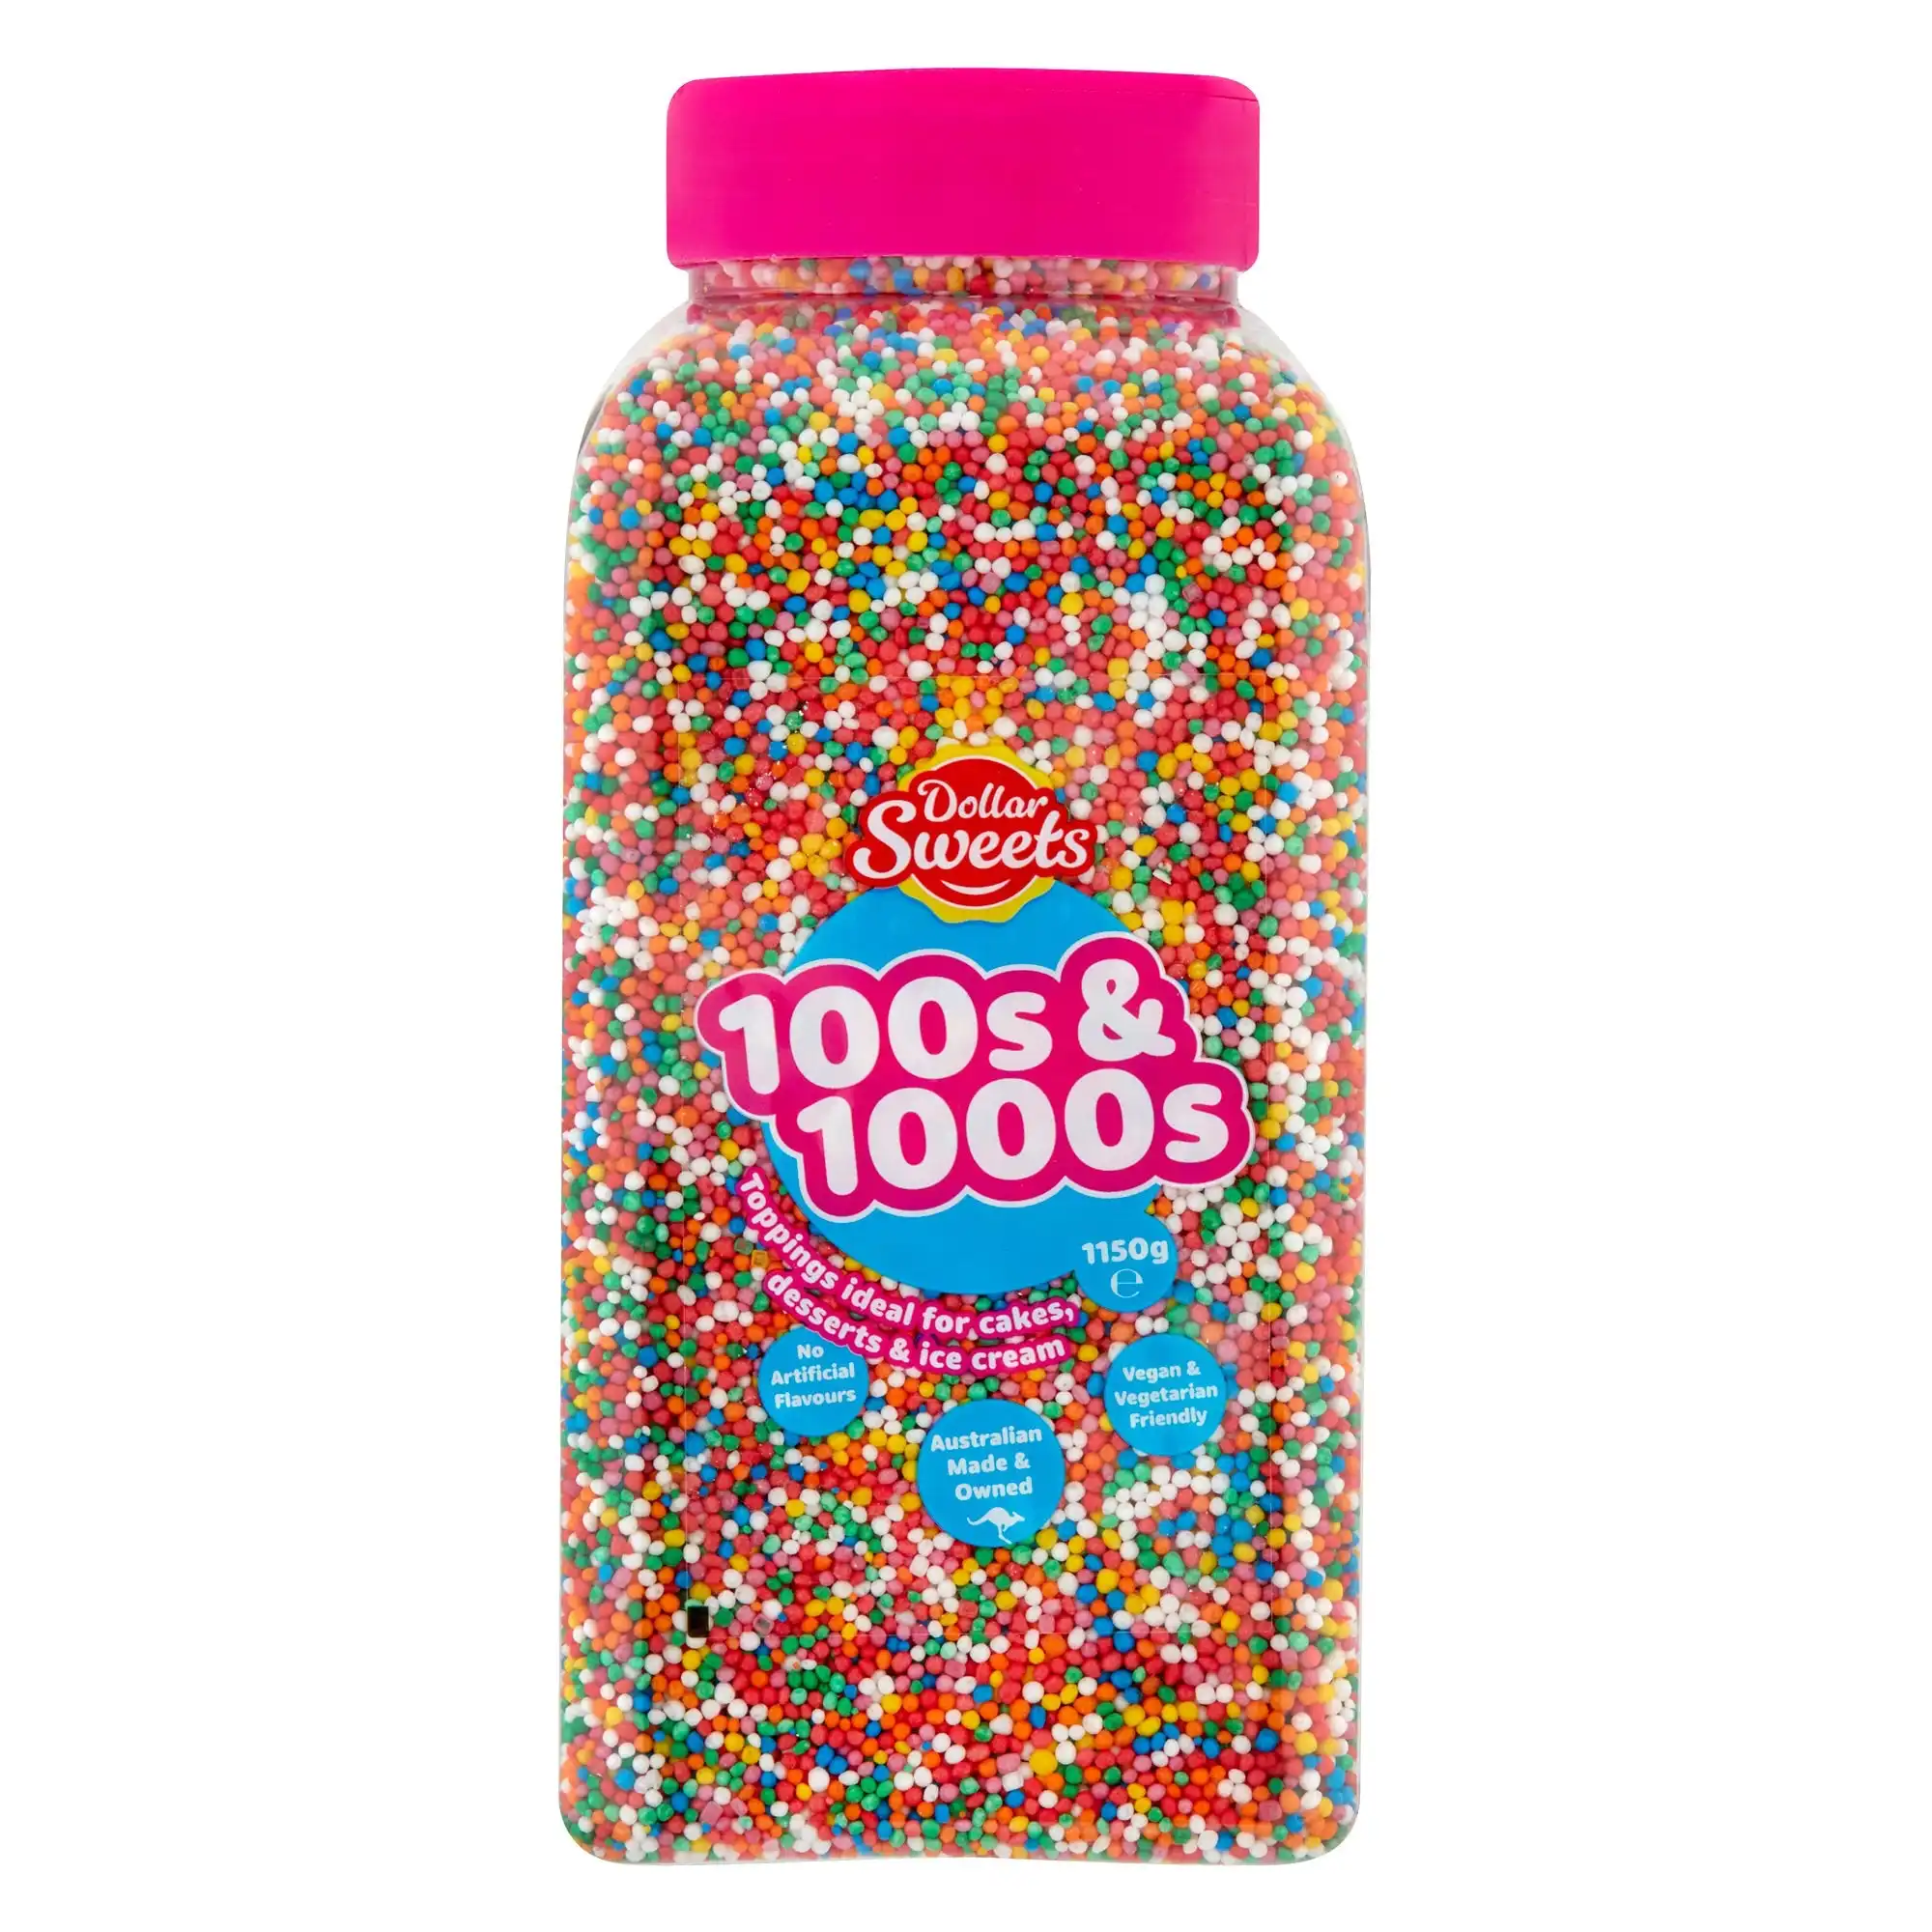 Dollar Sweets 100&#39;s and 1000&#39;s Sprinkles 1150g